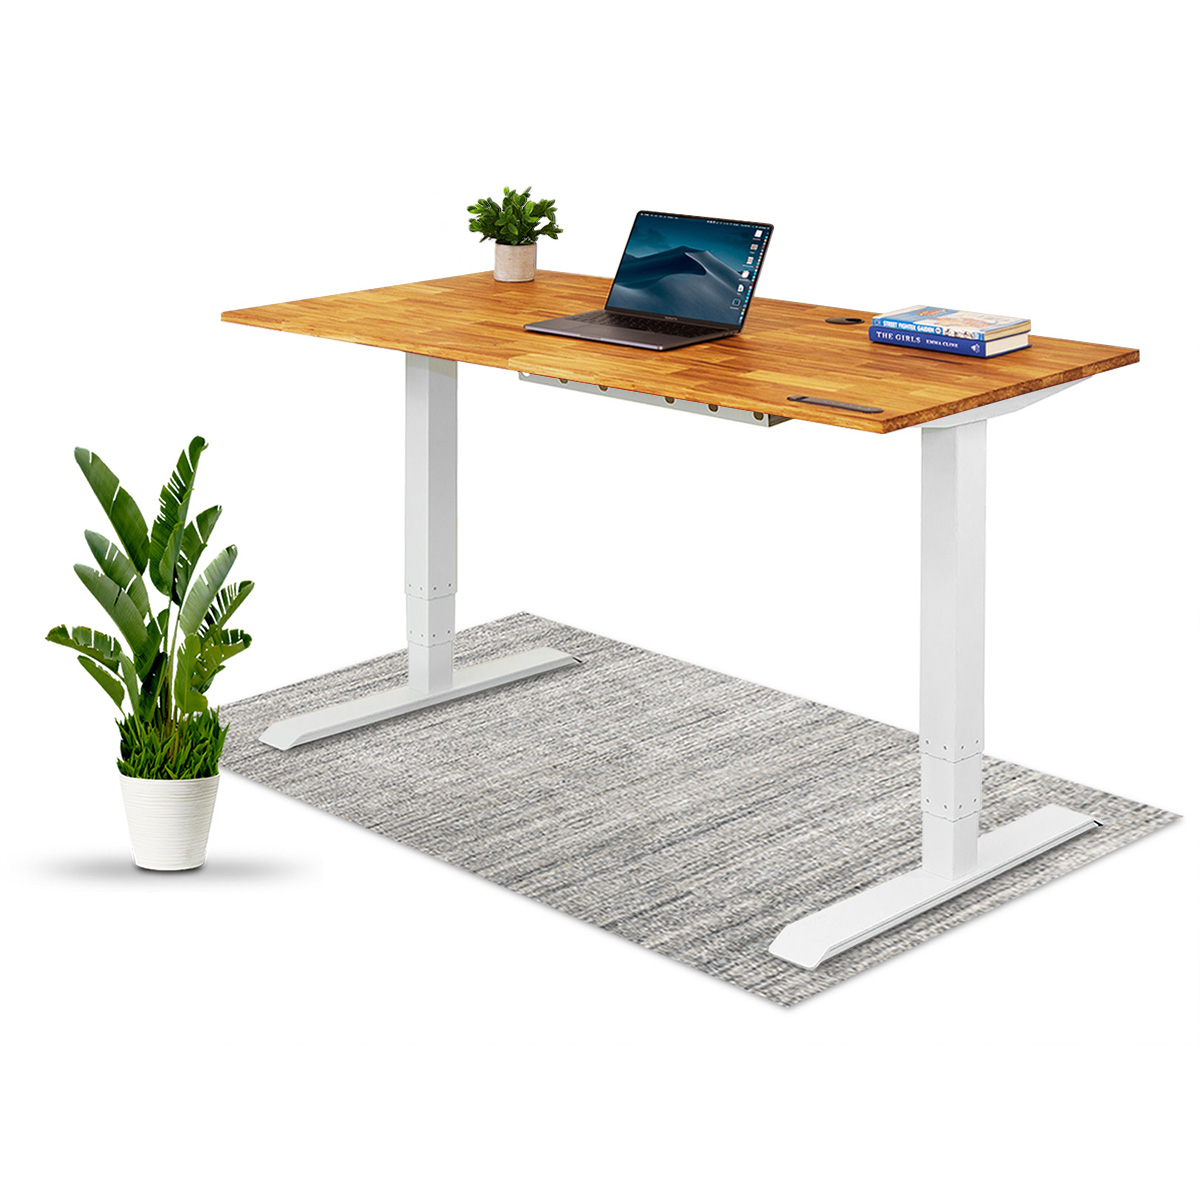 TerraDesk | Eco-Friendly Height-Adjustable Electric Standing Desk by EFFYDESK  EFFYDESK 55" x 29" White -better made easy-eco-friendly-sustainable-gifting